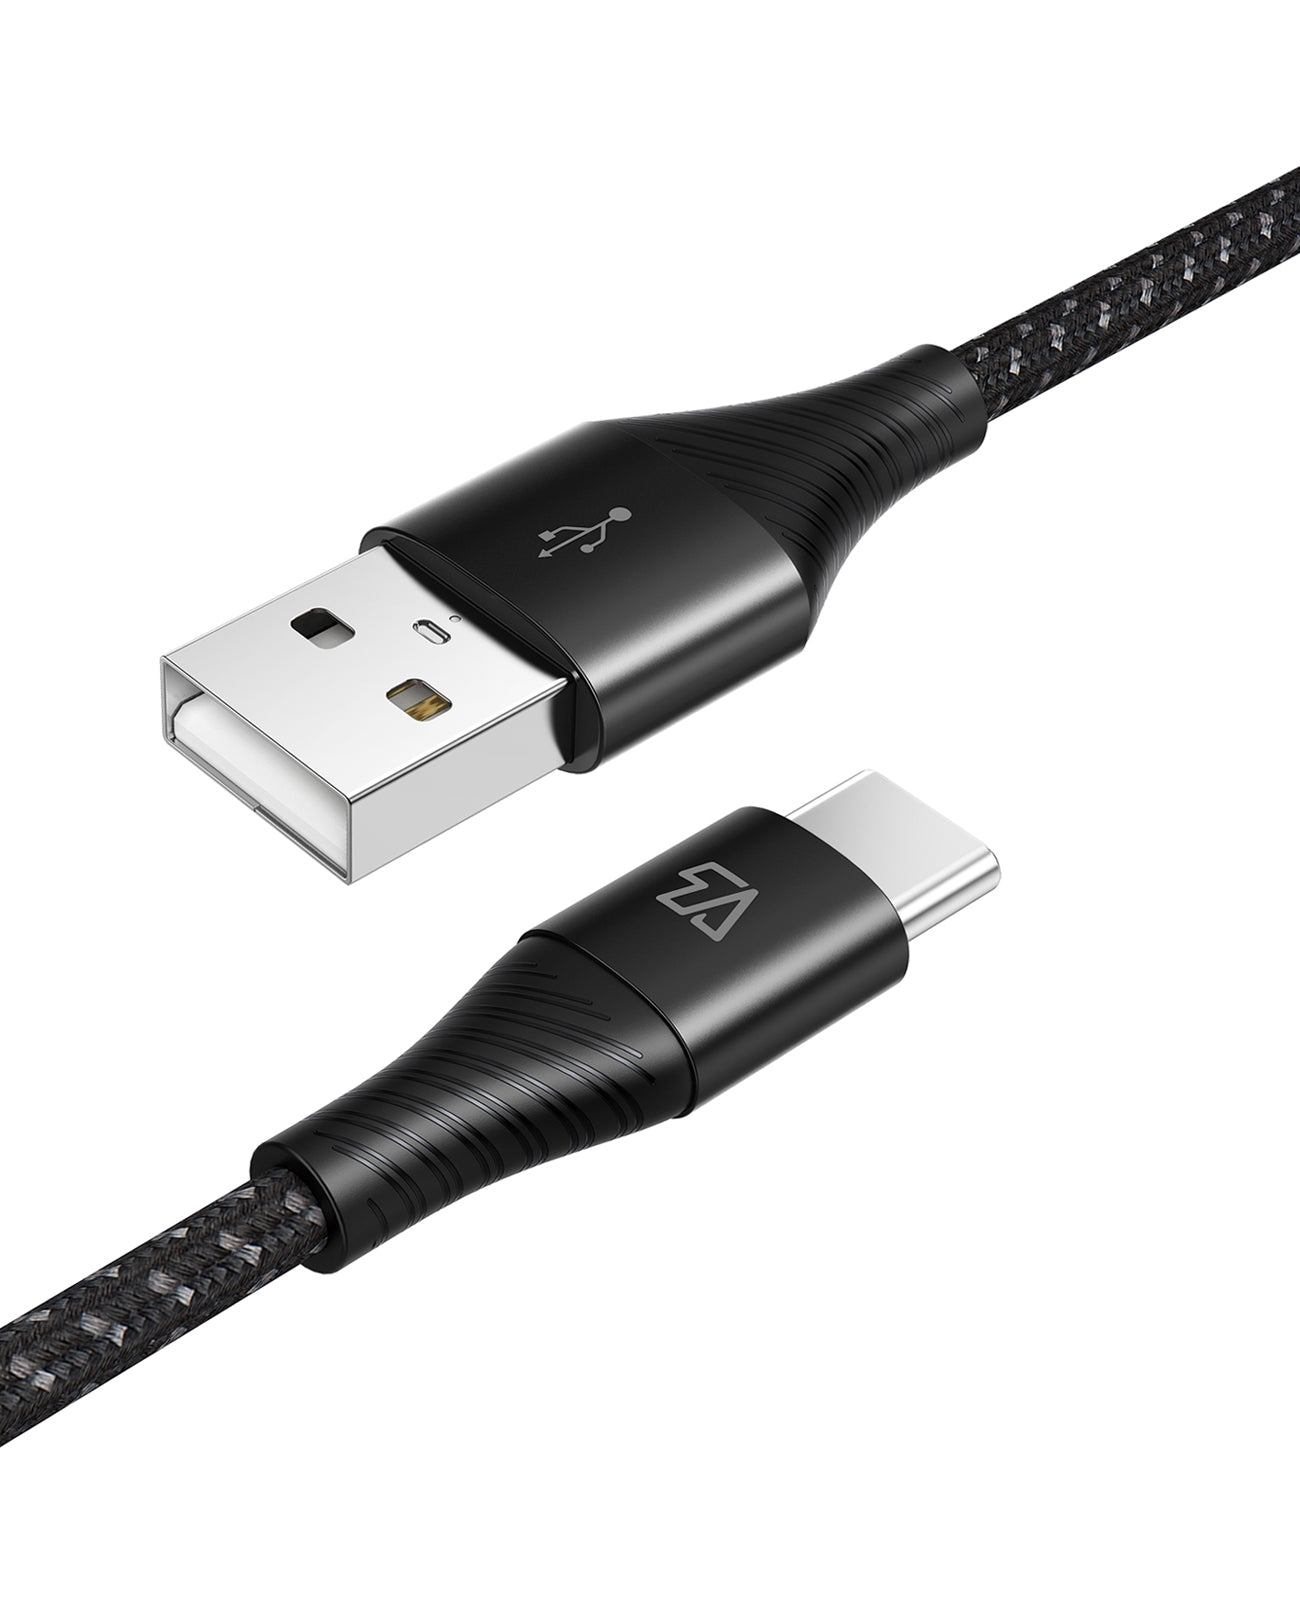 USB A to USB C Cable, 6FT/1.8M